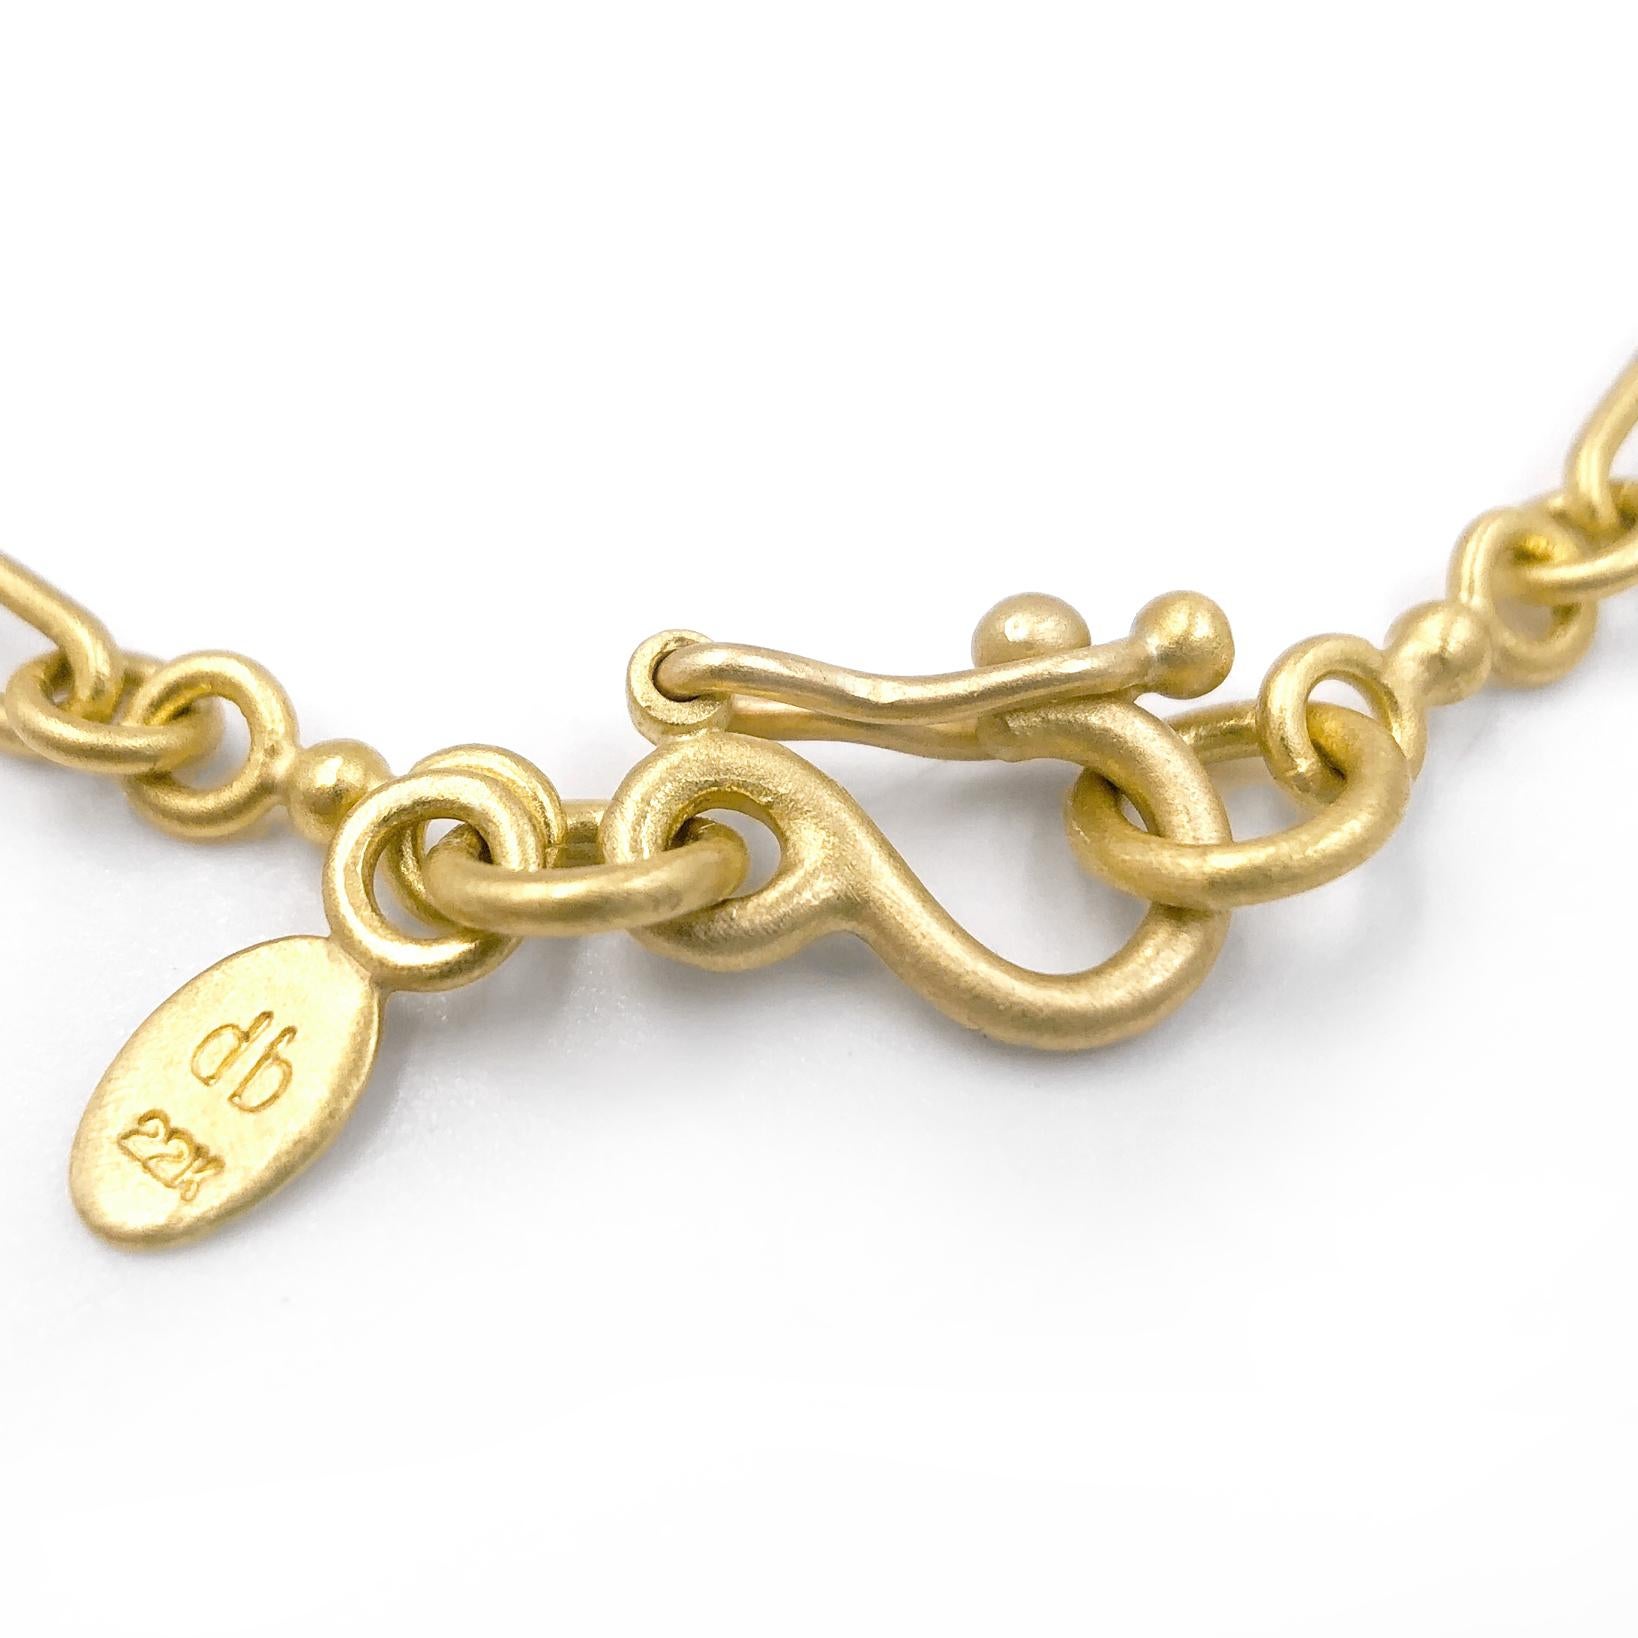 Single Ball Chain Link Bracelet handmade by artisan jeweler Denise Betesh in matte-finished 22k yellow gold and finished with an open cottonwood drop element embedded with a single round brilliant-cut white diamond. Heavy-duty locking 18k/20k yellow